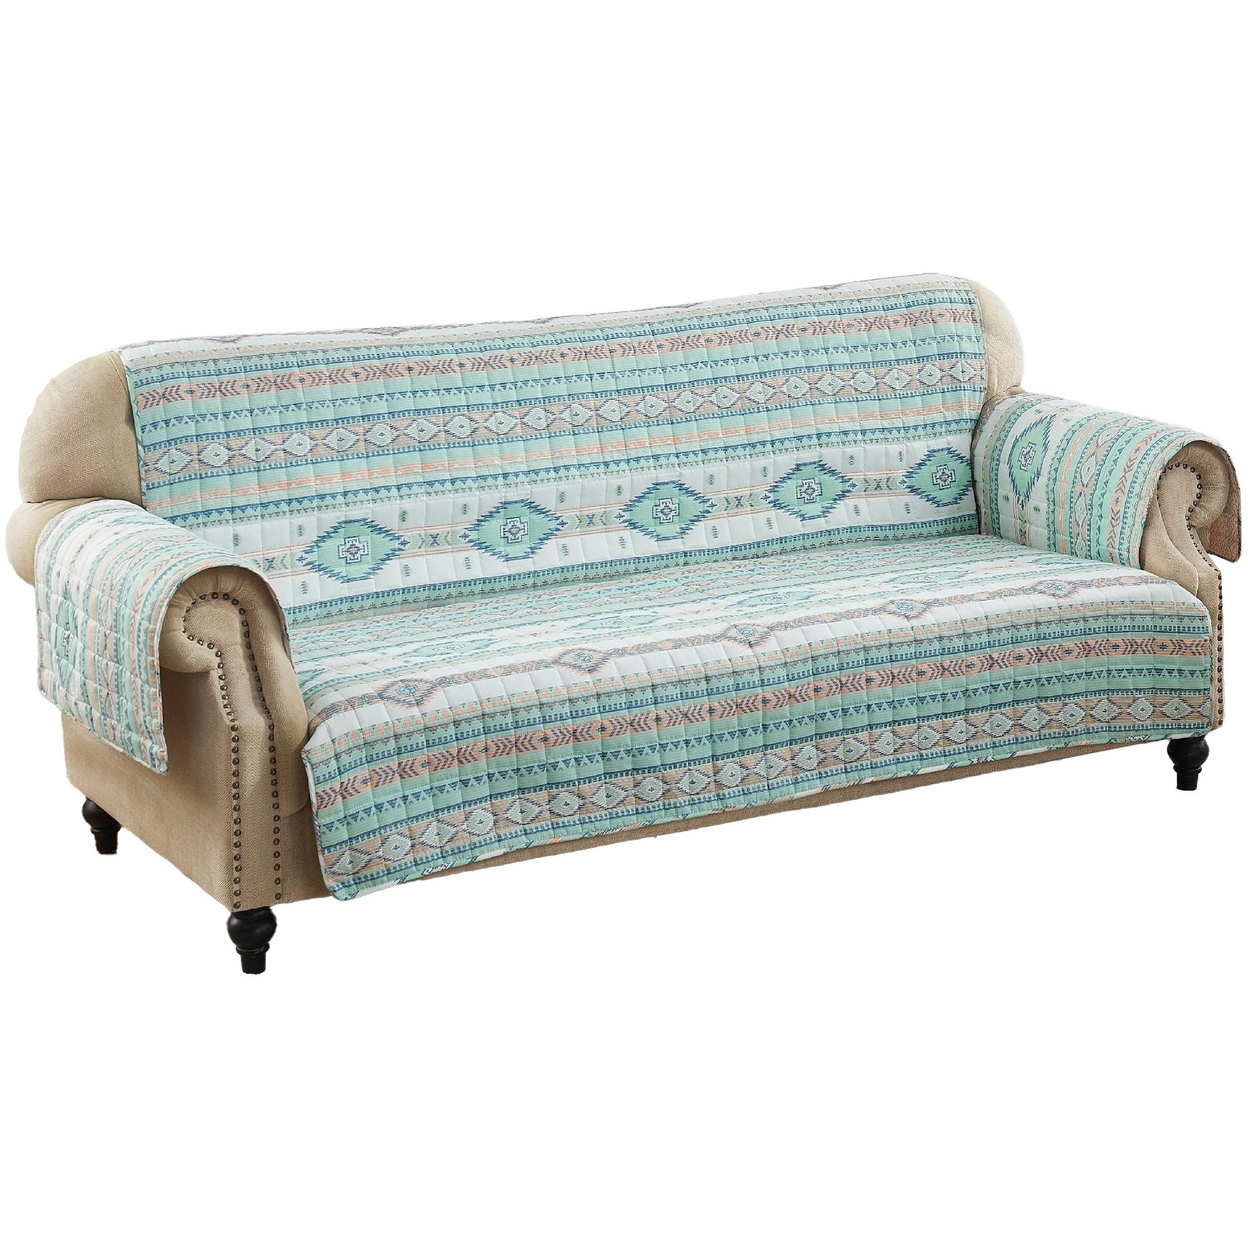 Linda 127 Inch Quilted Sofa Cover With Geometric Print, Turquoise Polyester-Saltoro Sherpi